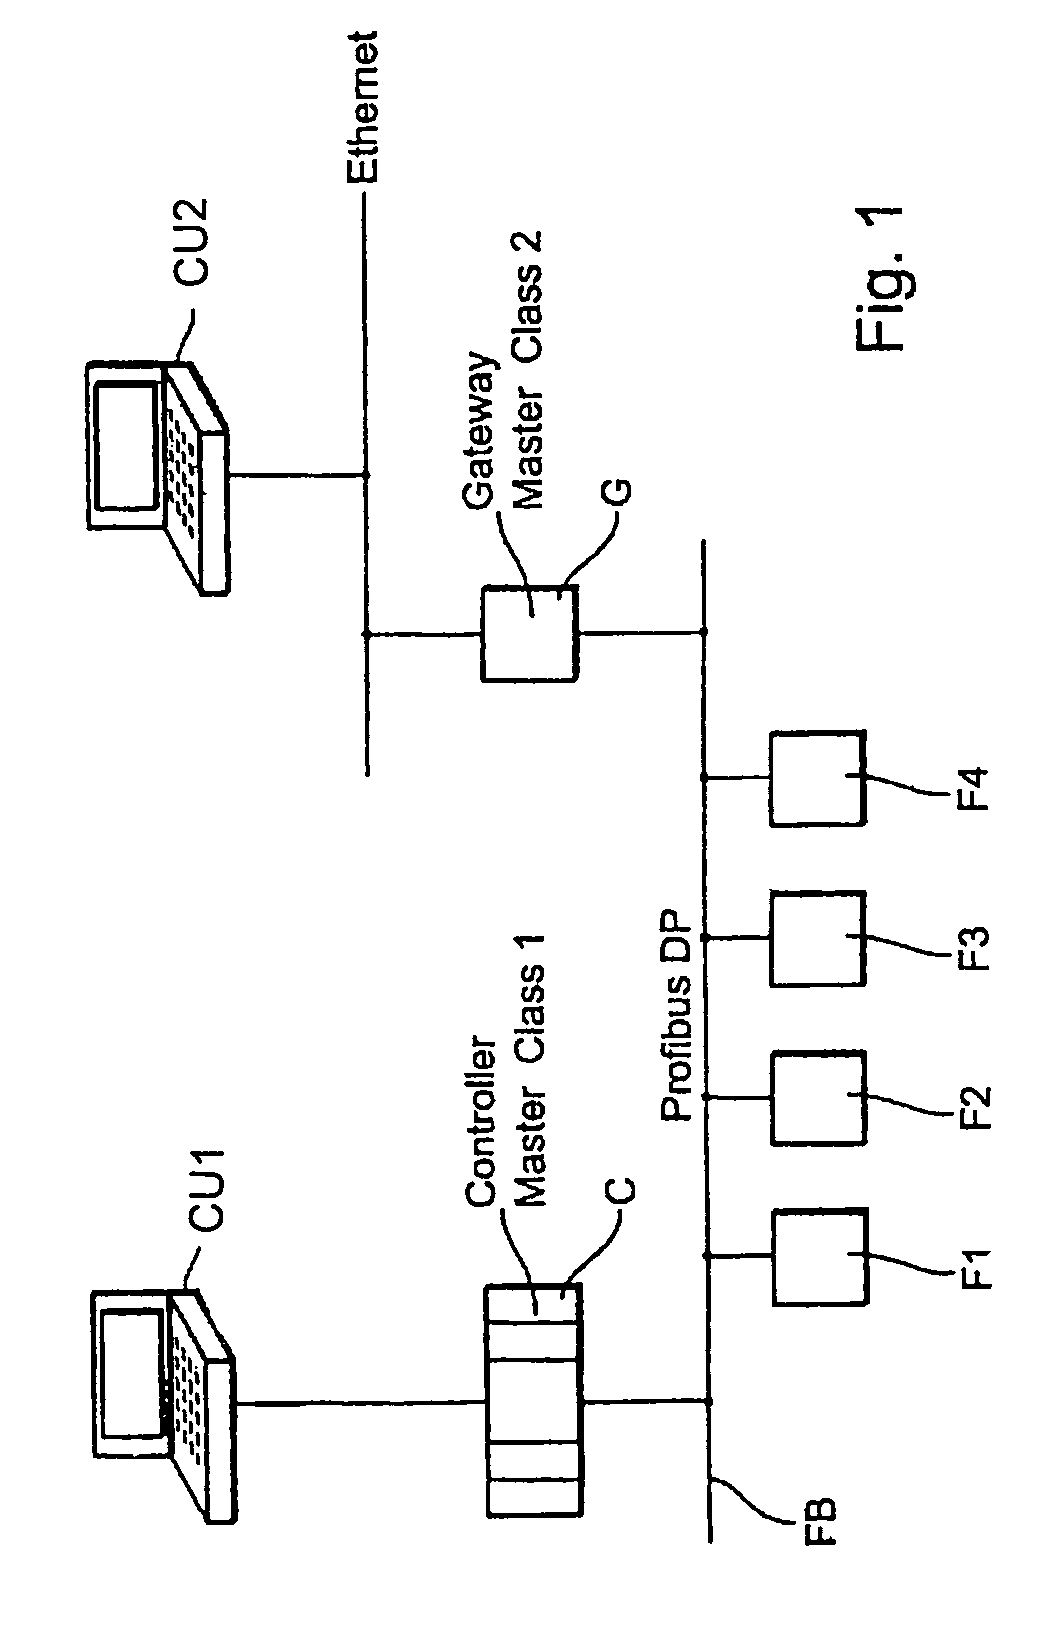 Method for plant monitoring with a field bus of process automation technology